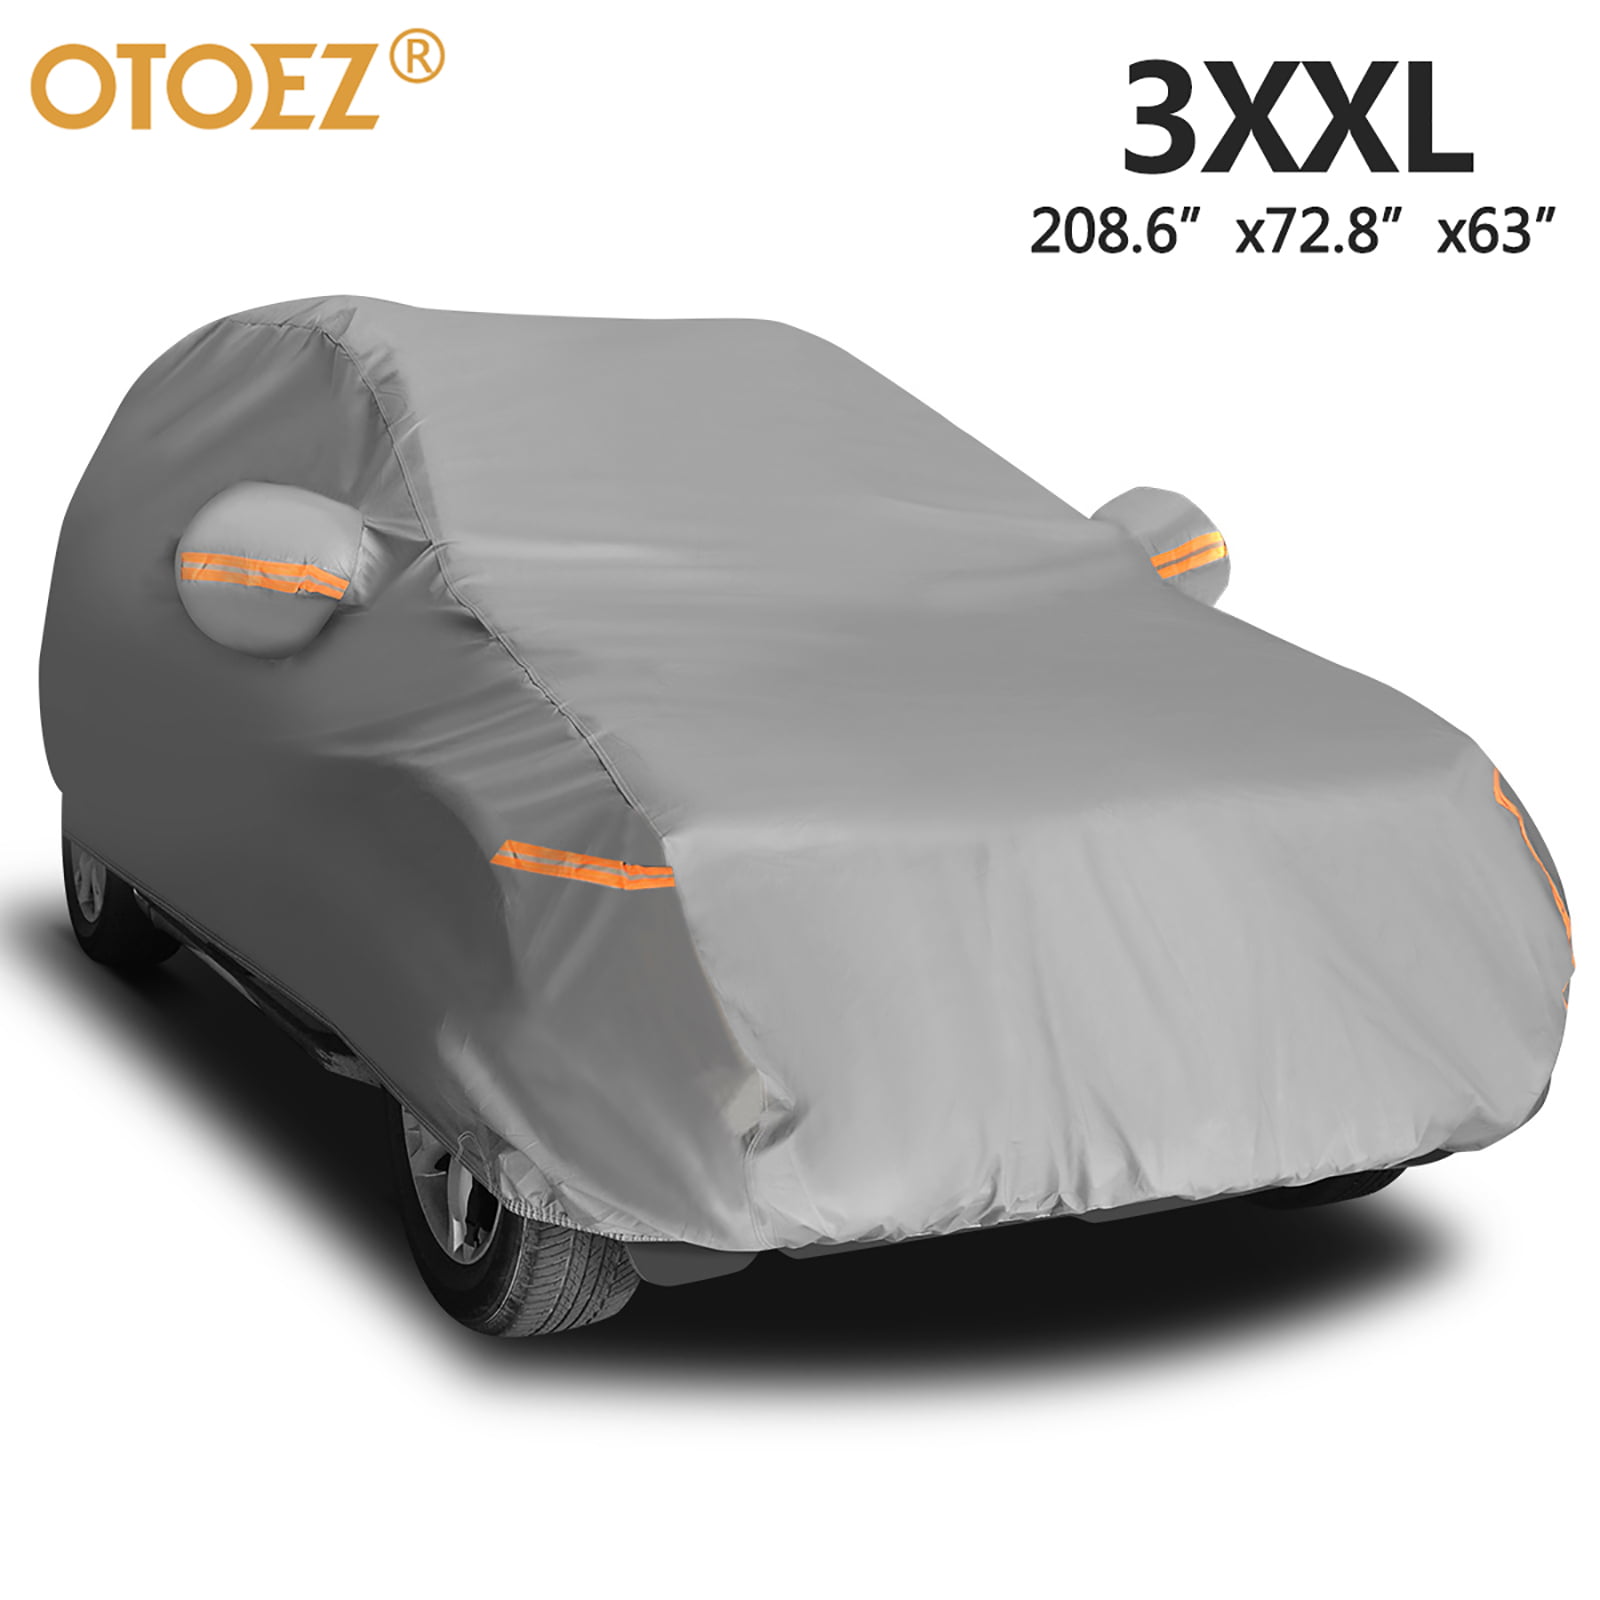  AI HUI Car Cover Custom Fit Nissan 350Z, Car Cover Waterproof  All Weather for Automobiles, Full Outdoor Indoor Exterior Car Covers  Windproof Snowproof Rain UV Protection : Automotive